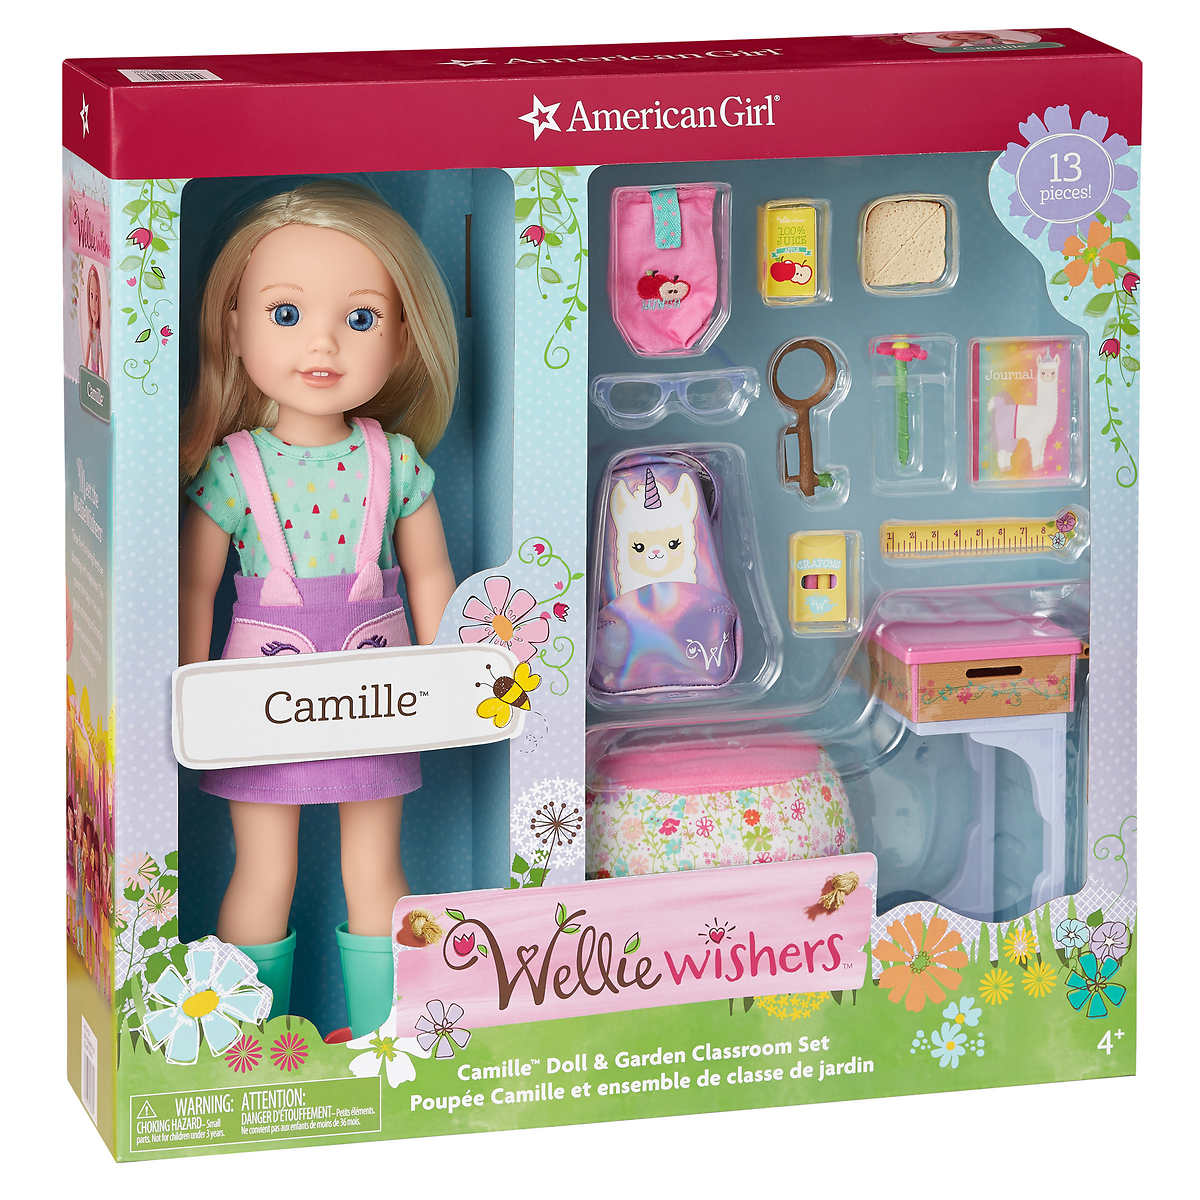 American Girl Wellie Wisher Camille Doll, doll clothing and books